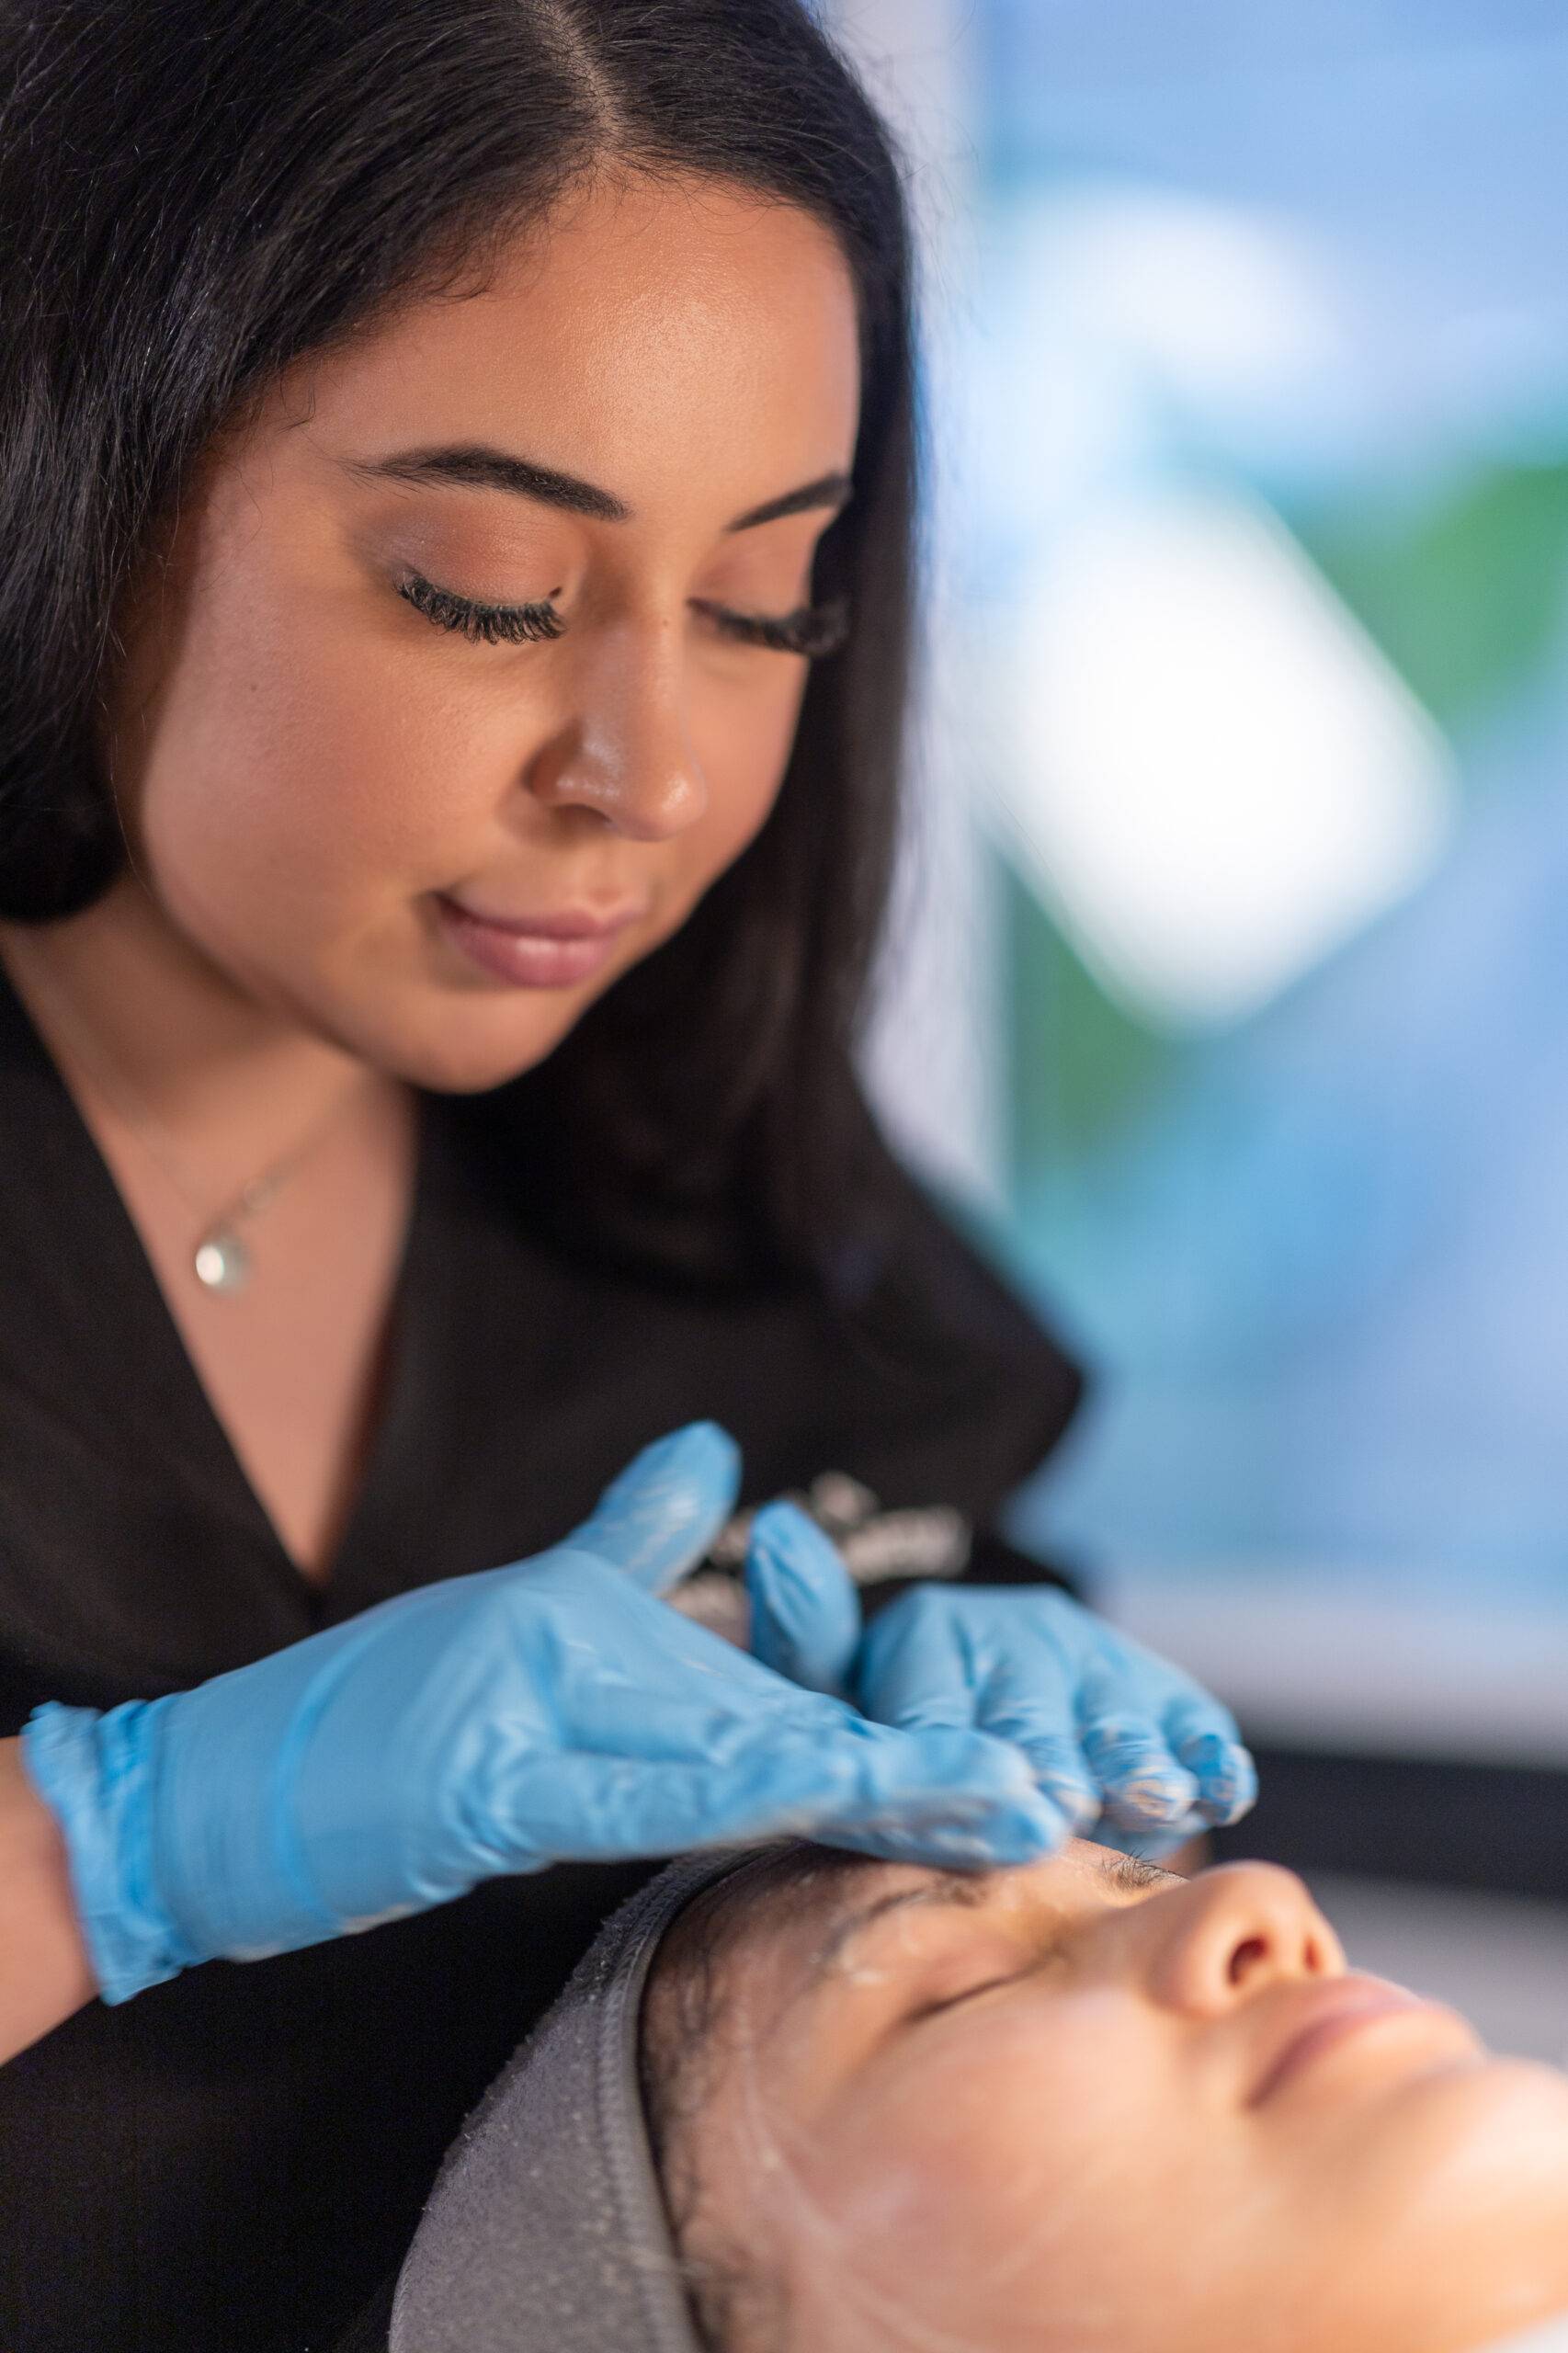 A beautician in black attire and blue gloves performs a skin treatment on a relaxed female client lying down, focusing intently on her task in a brightly lit salon setting.